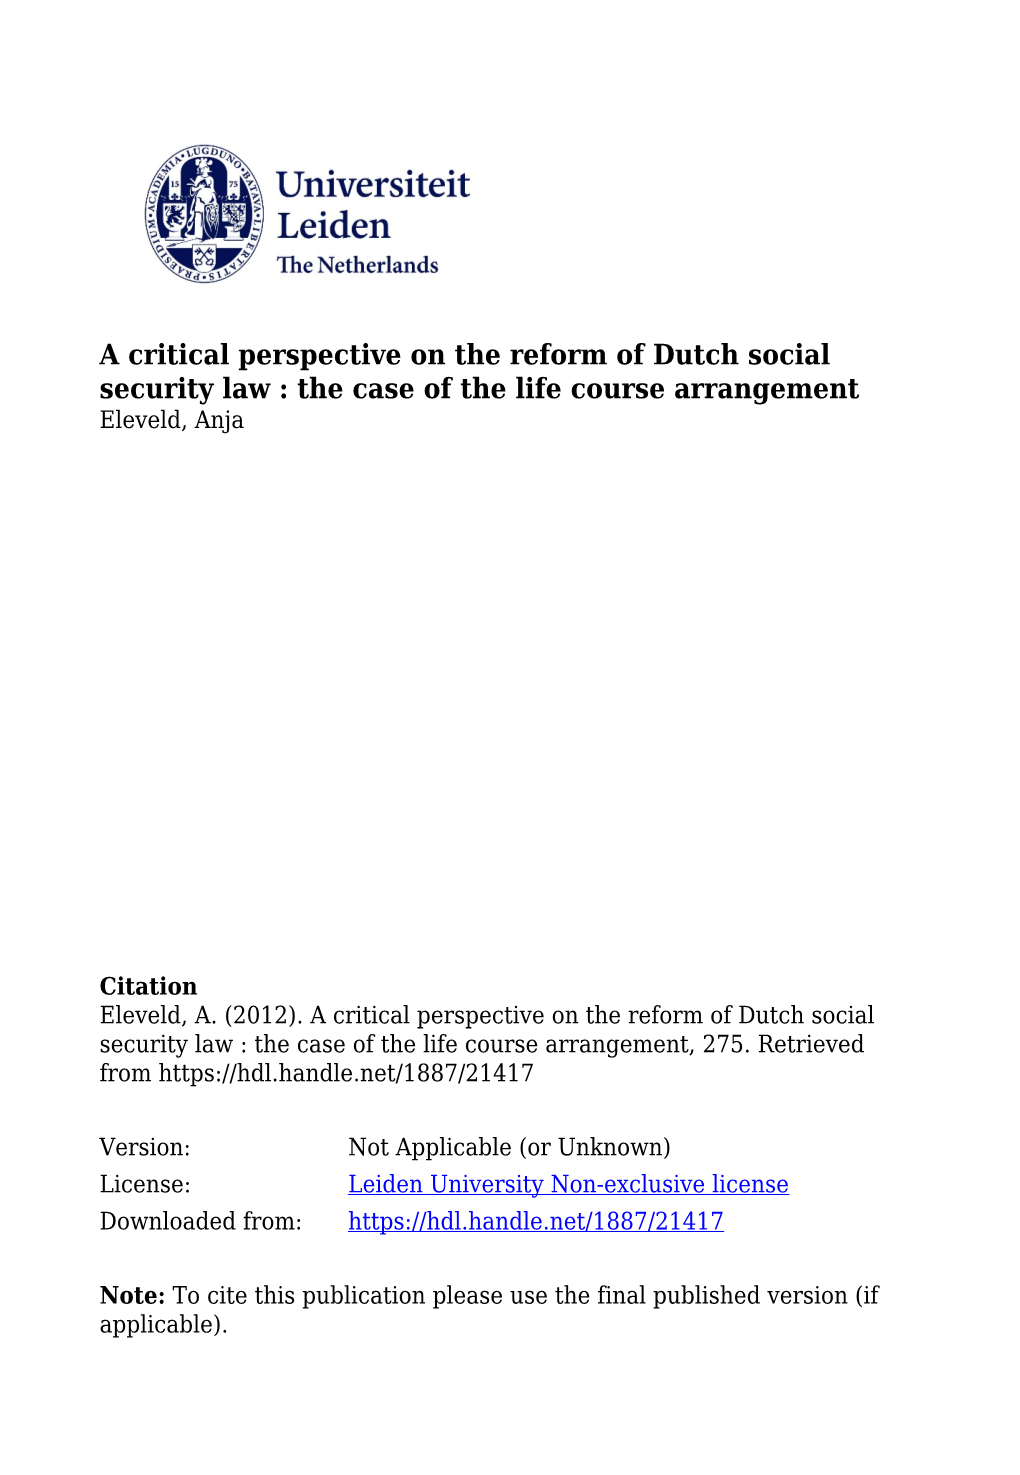 A Critical Perspective on the Reform of Dutch Social Security Law : the Case of the Life Course Arrangement Eleveld, Anja